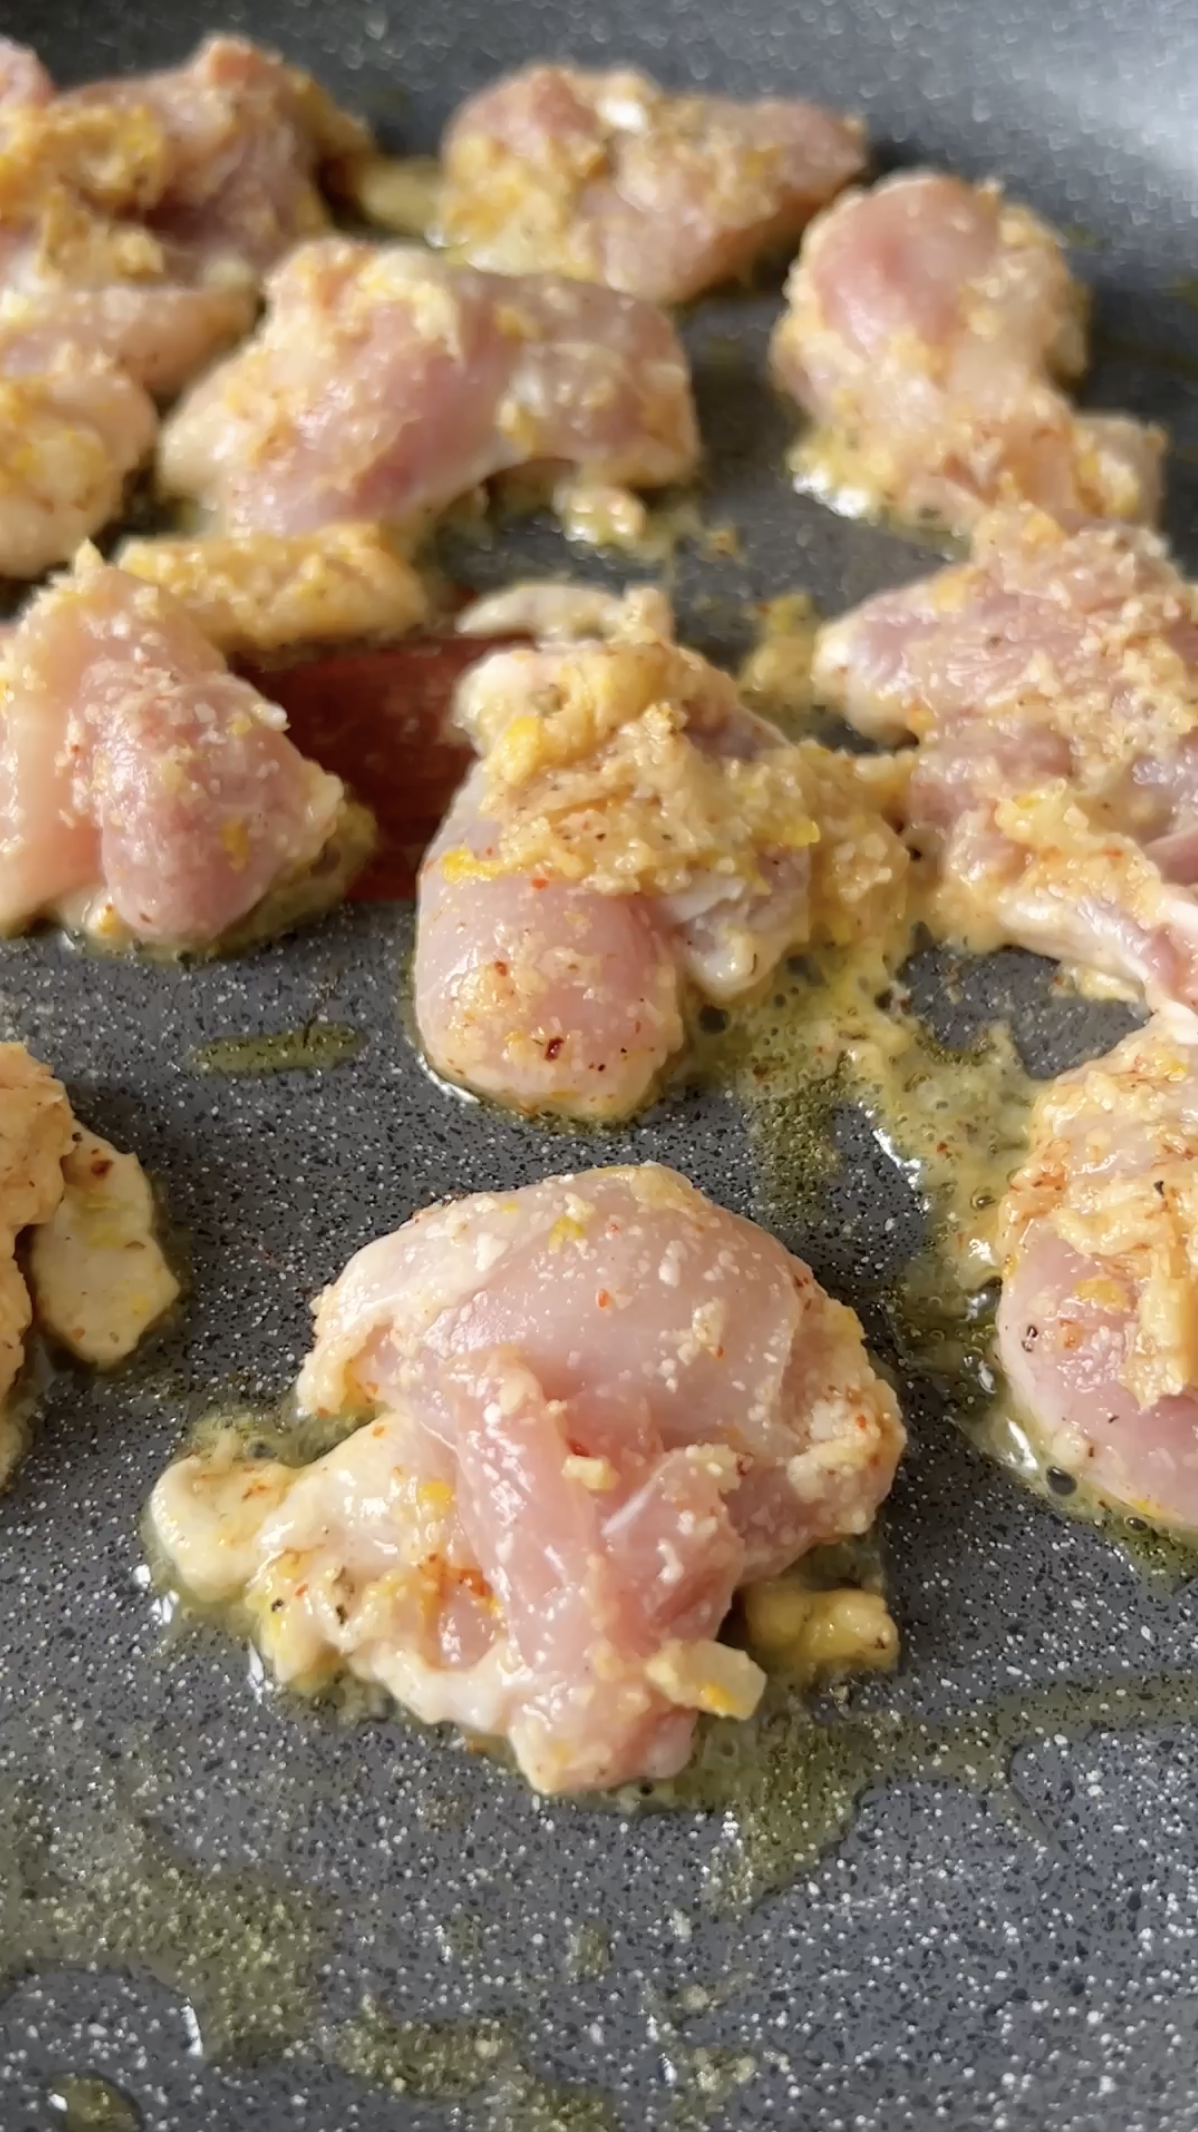 Chicken pieces, with lemon zest and Parmesan cheese, cooking in the pan.